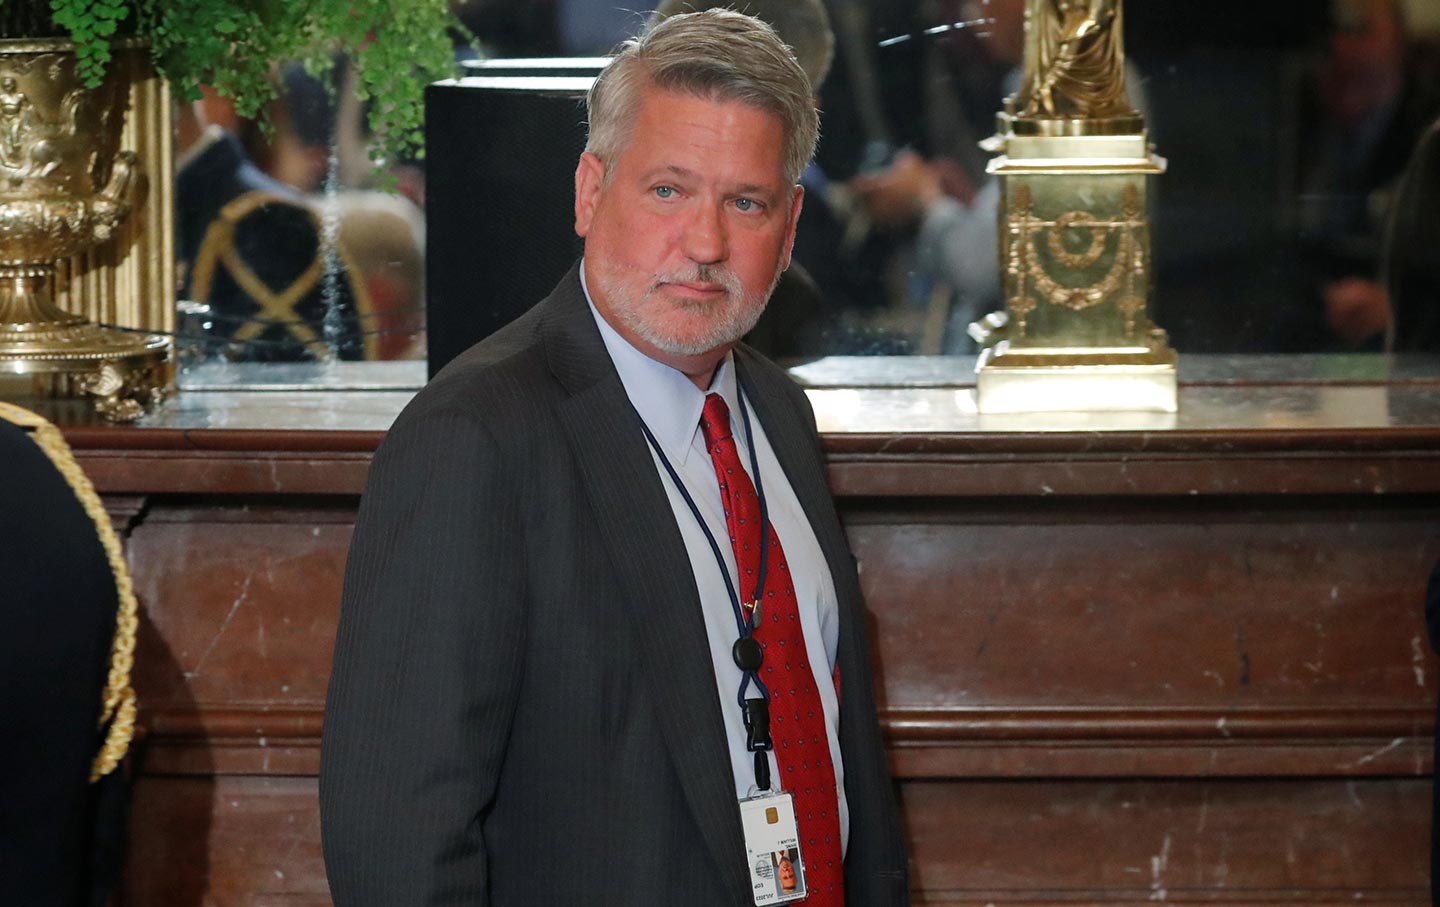 White House Deputy Chief of Staff for Communications Bill Shine